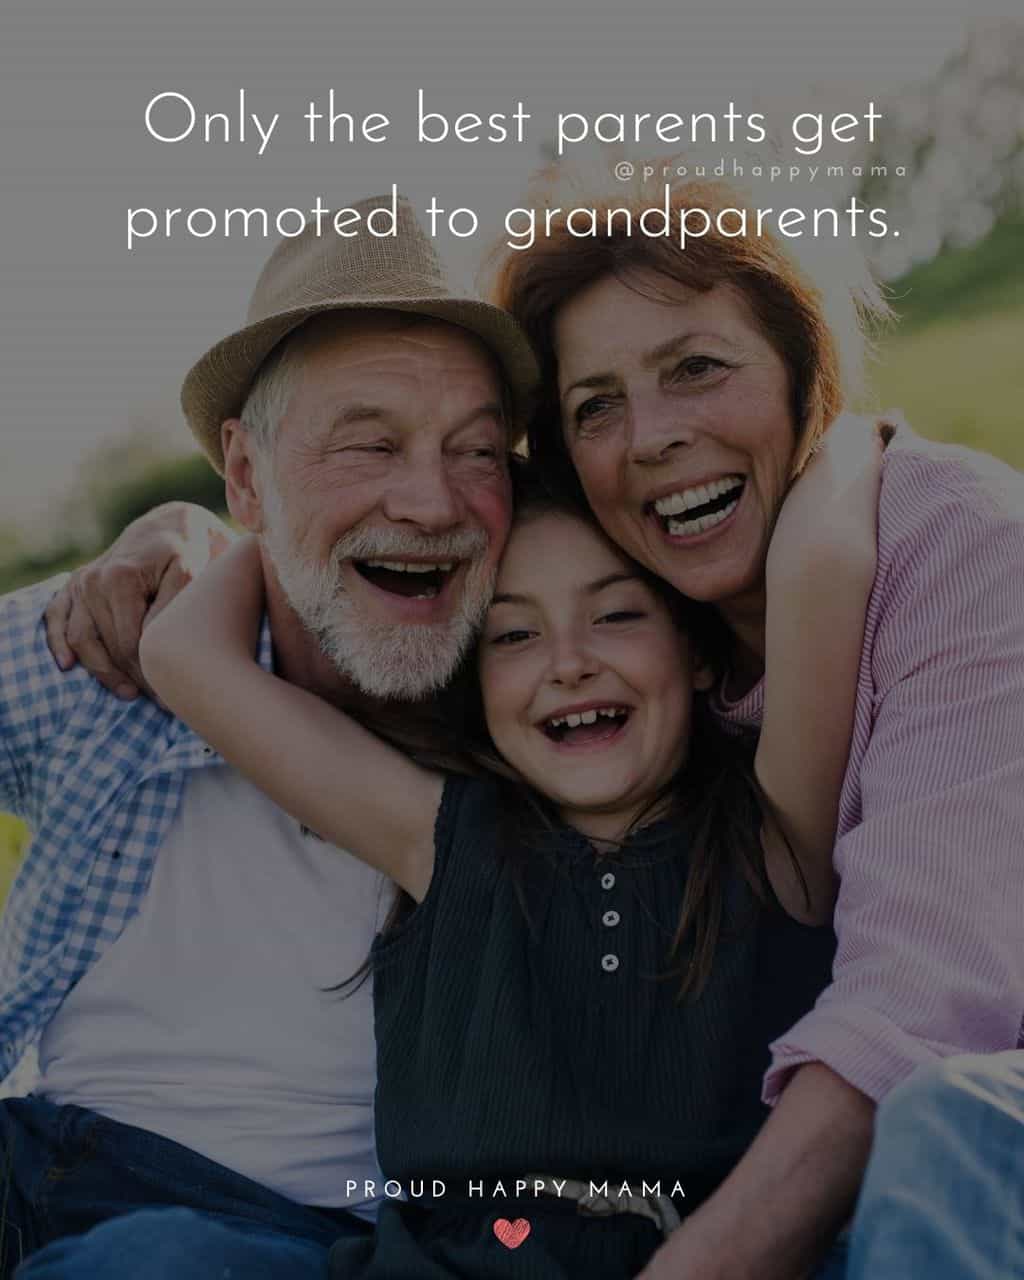 Grandparent Quotes – Only the best parents get promoted to grandparents.’